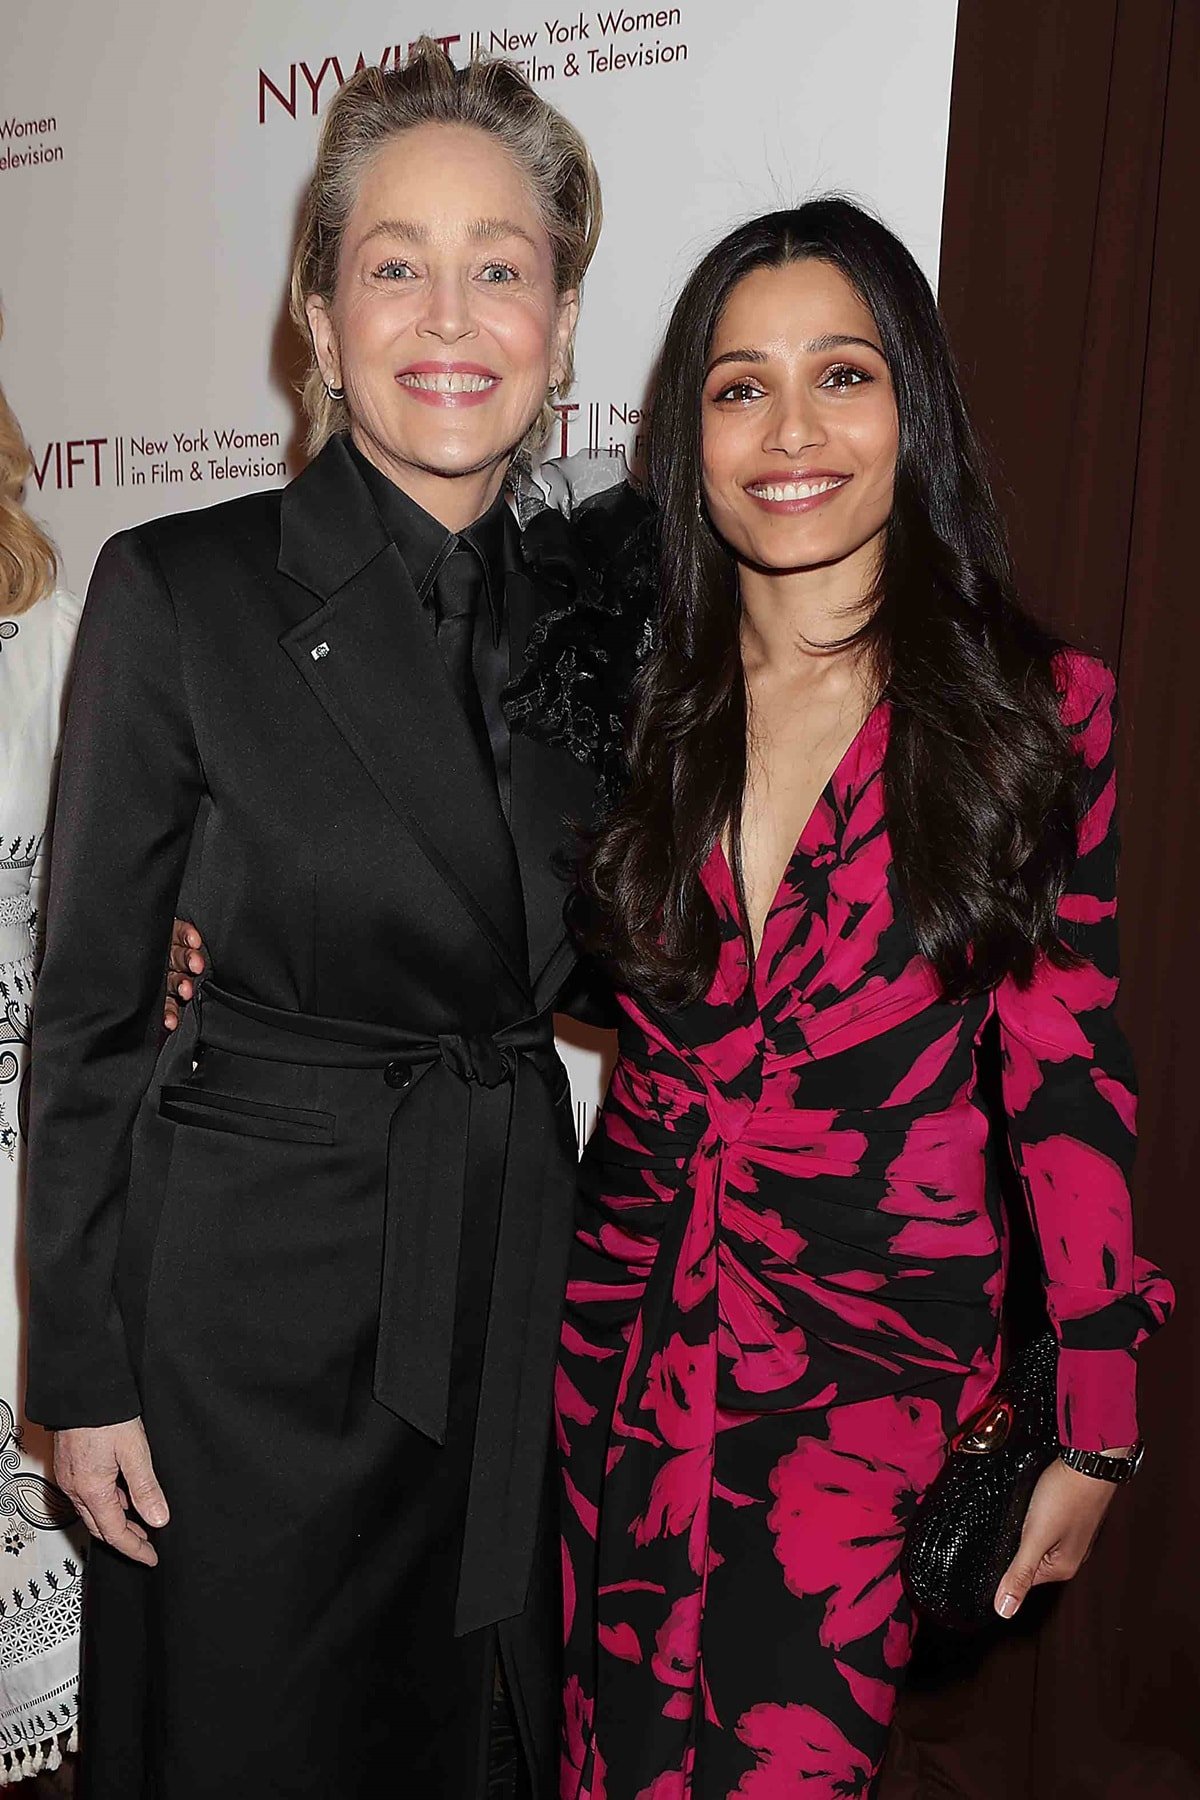 At the New York Women In Film And Television's 43rd Annual Muse Awards on March 28, 2023, in New York City, the 5ft 8 (172.7 cm) tall Sharon Stone stood notably taller than Freida Pinto, who measures 5ft 5 (165.1 cm)